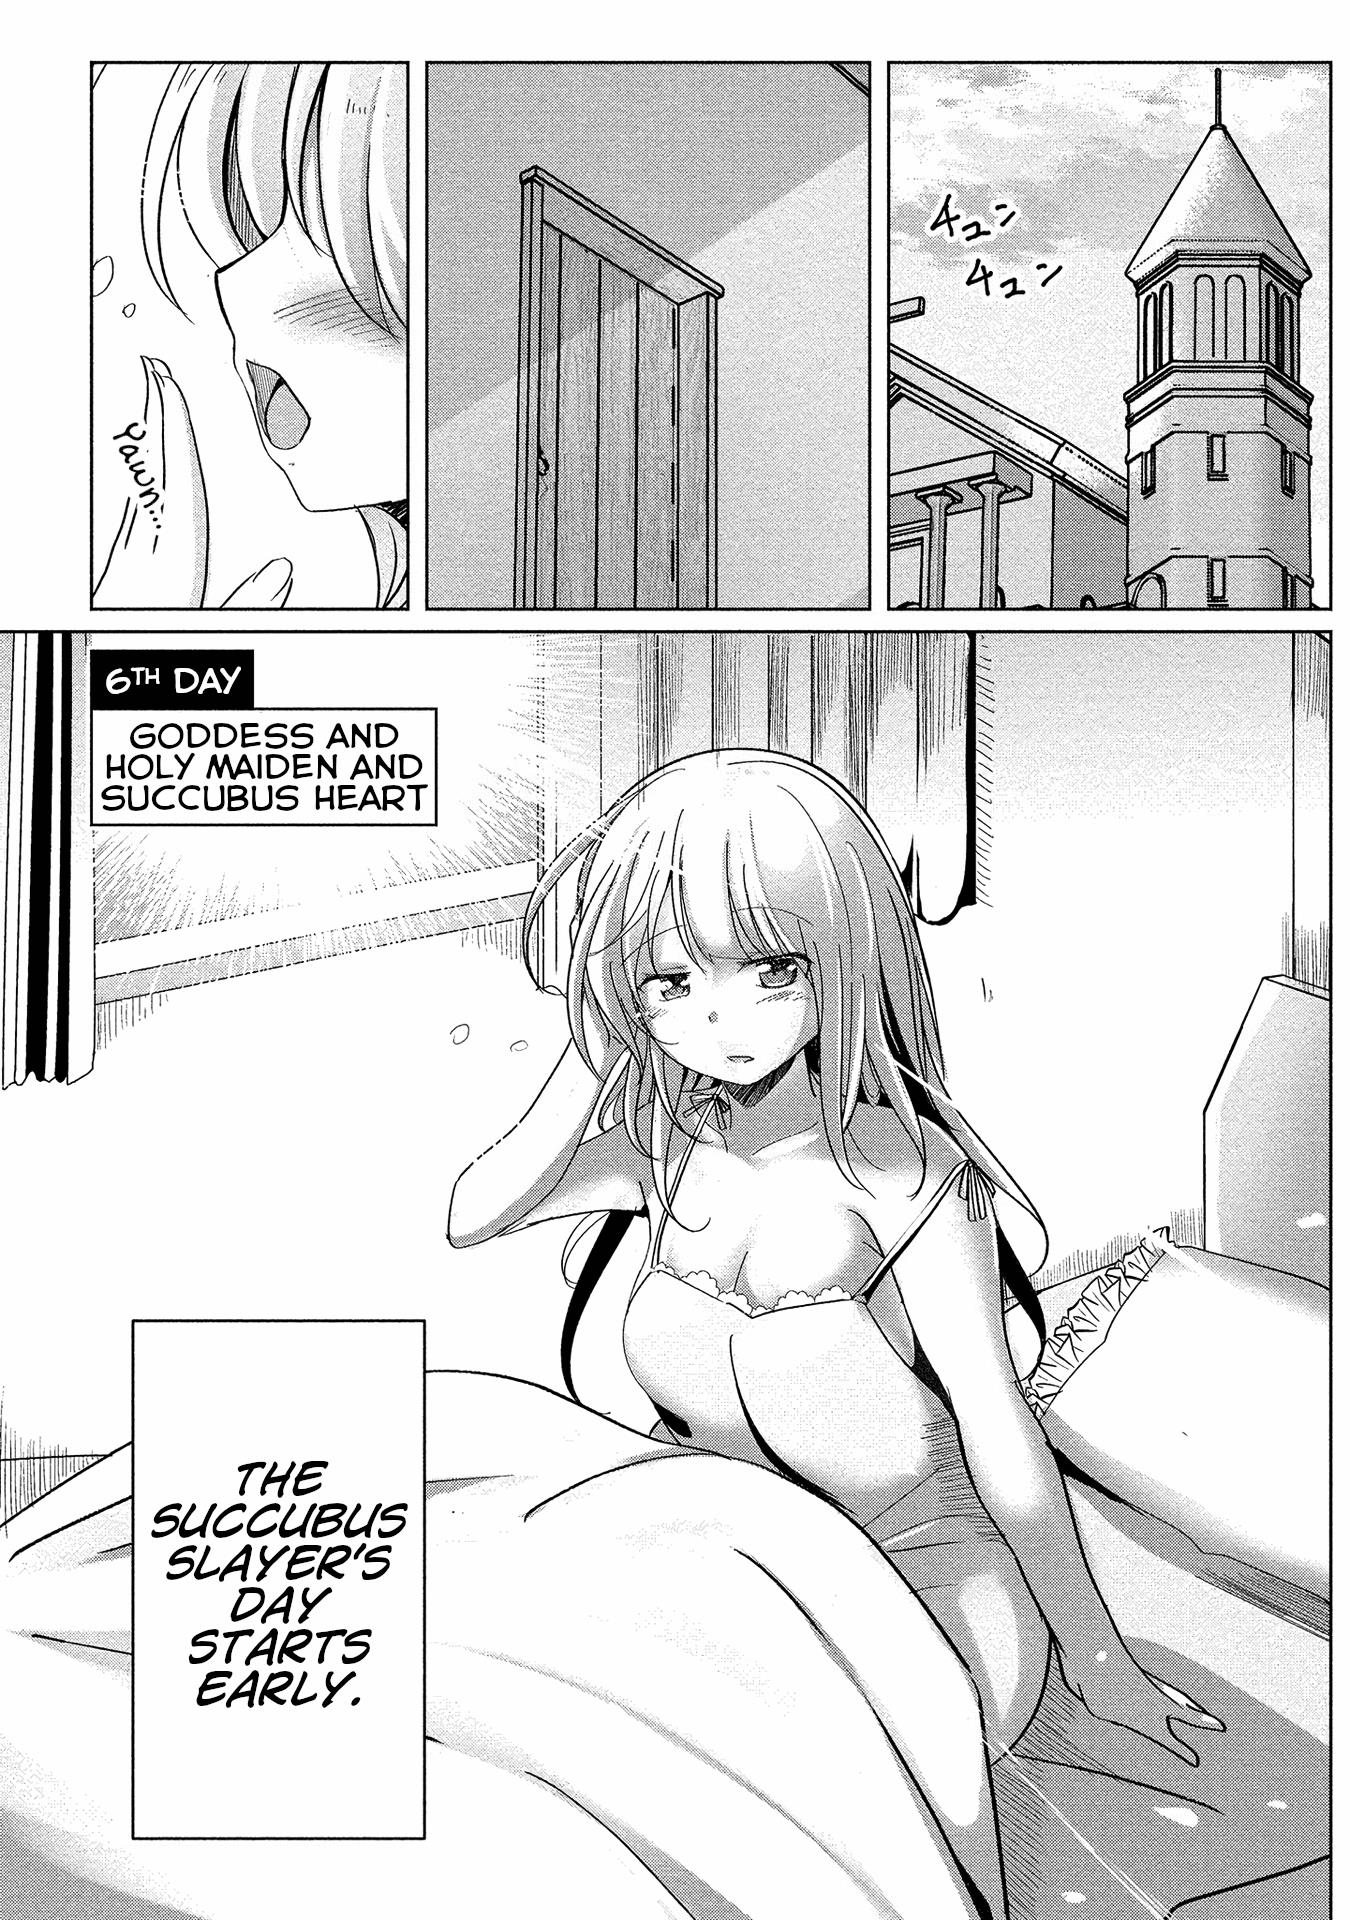 Dunking On Succubi In Another World Vol.1 Chapter 6: Goddess And Holy Maiden And Succubus Heart - Picture 1